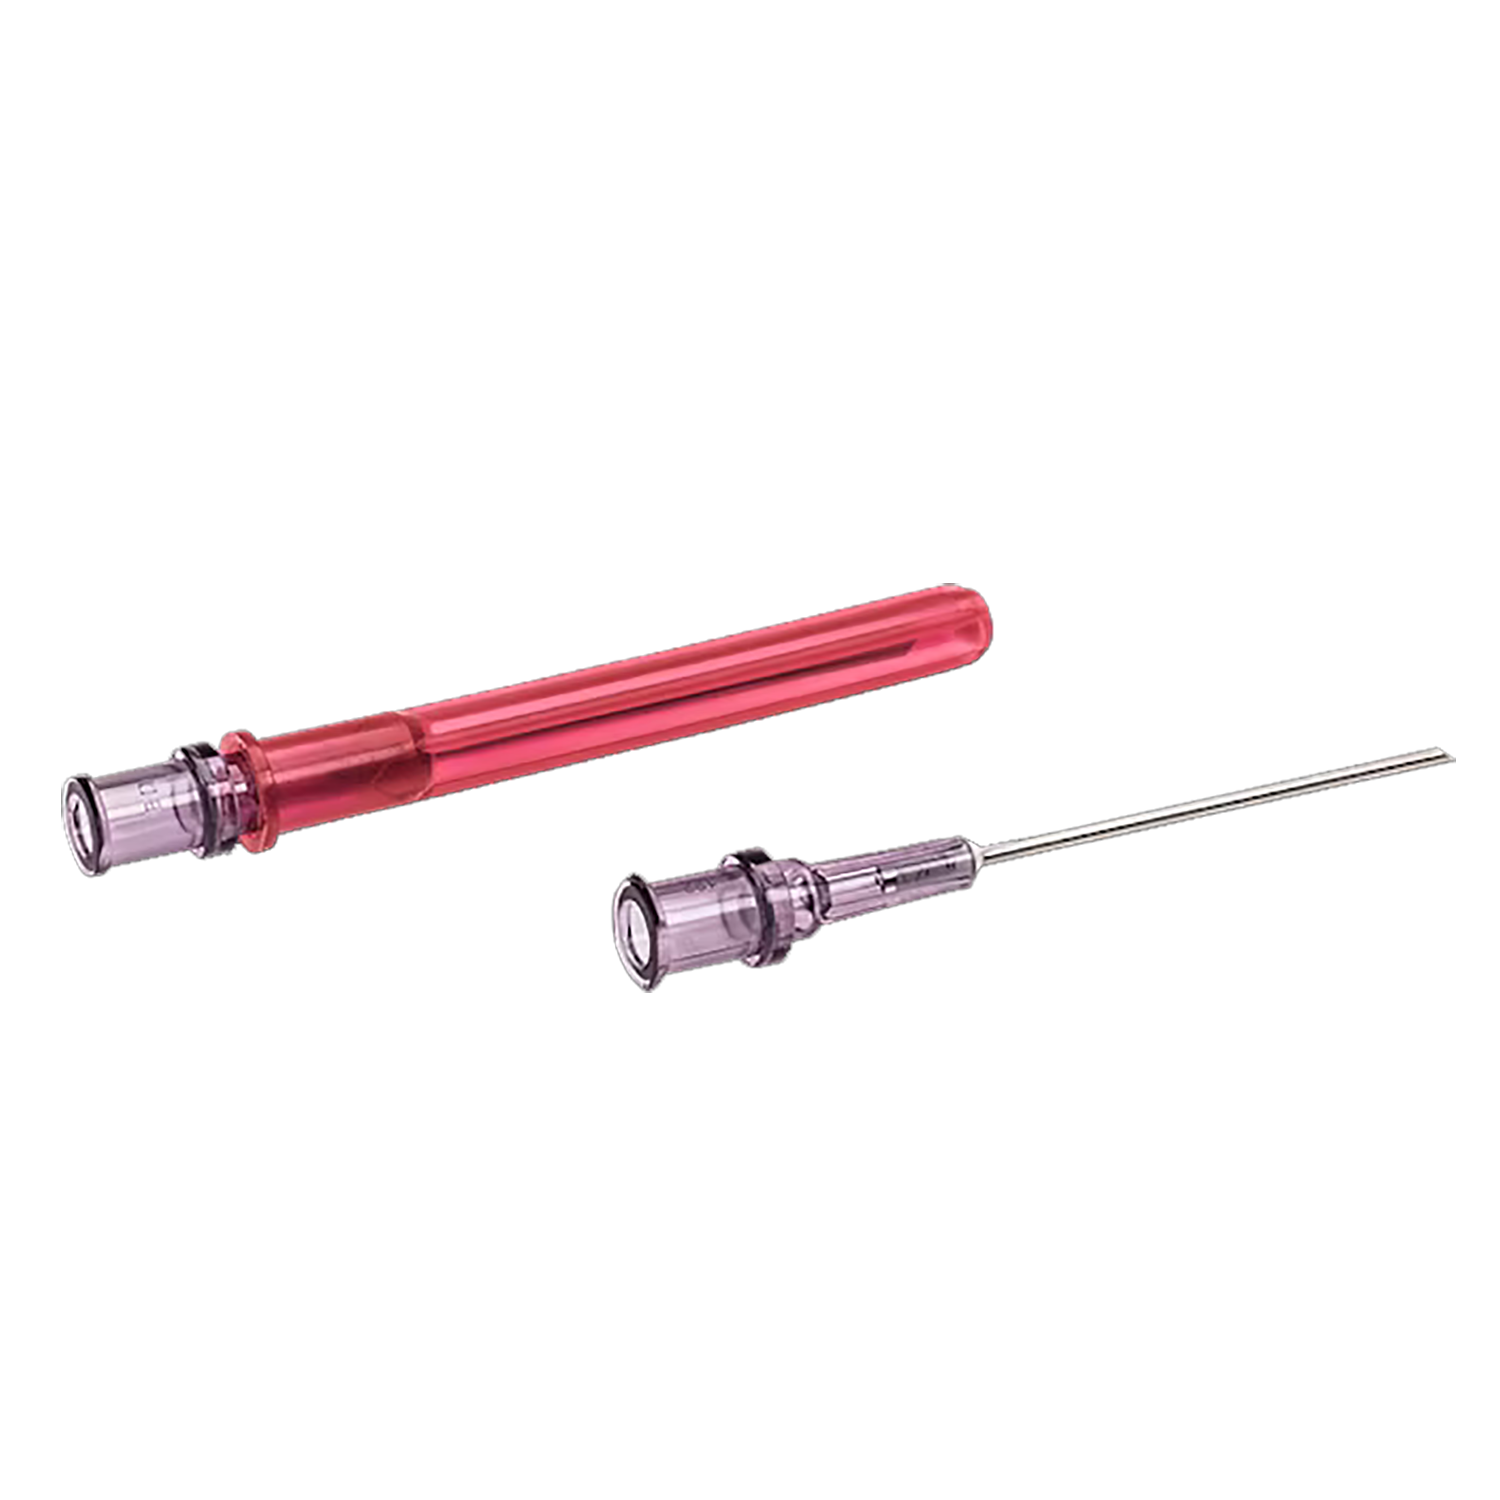 BD Blunt Fill Needle | 18G x 1 1/2" | Pack of 1000